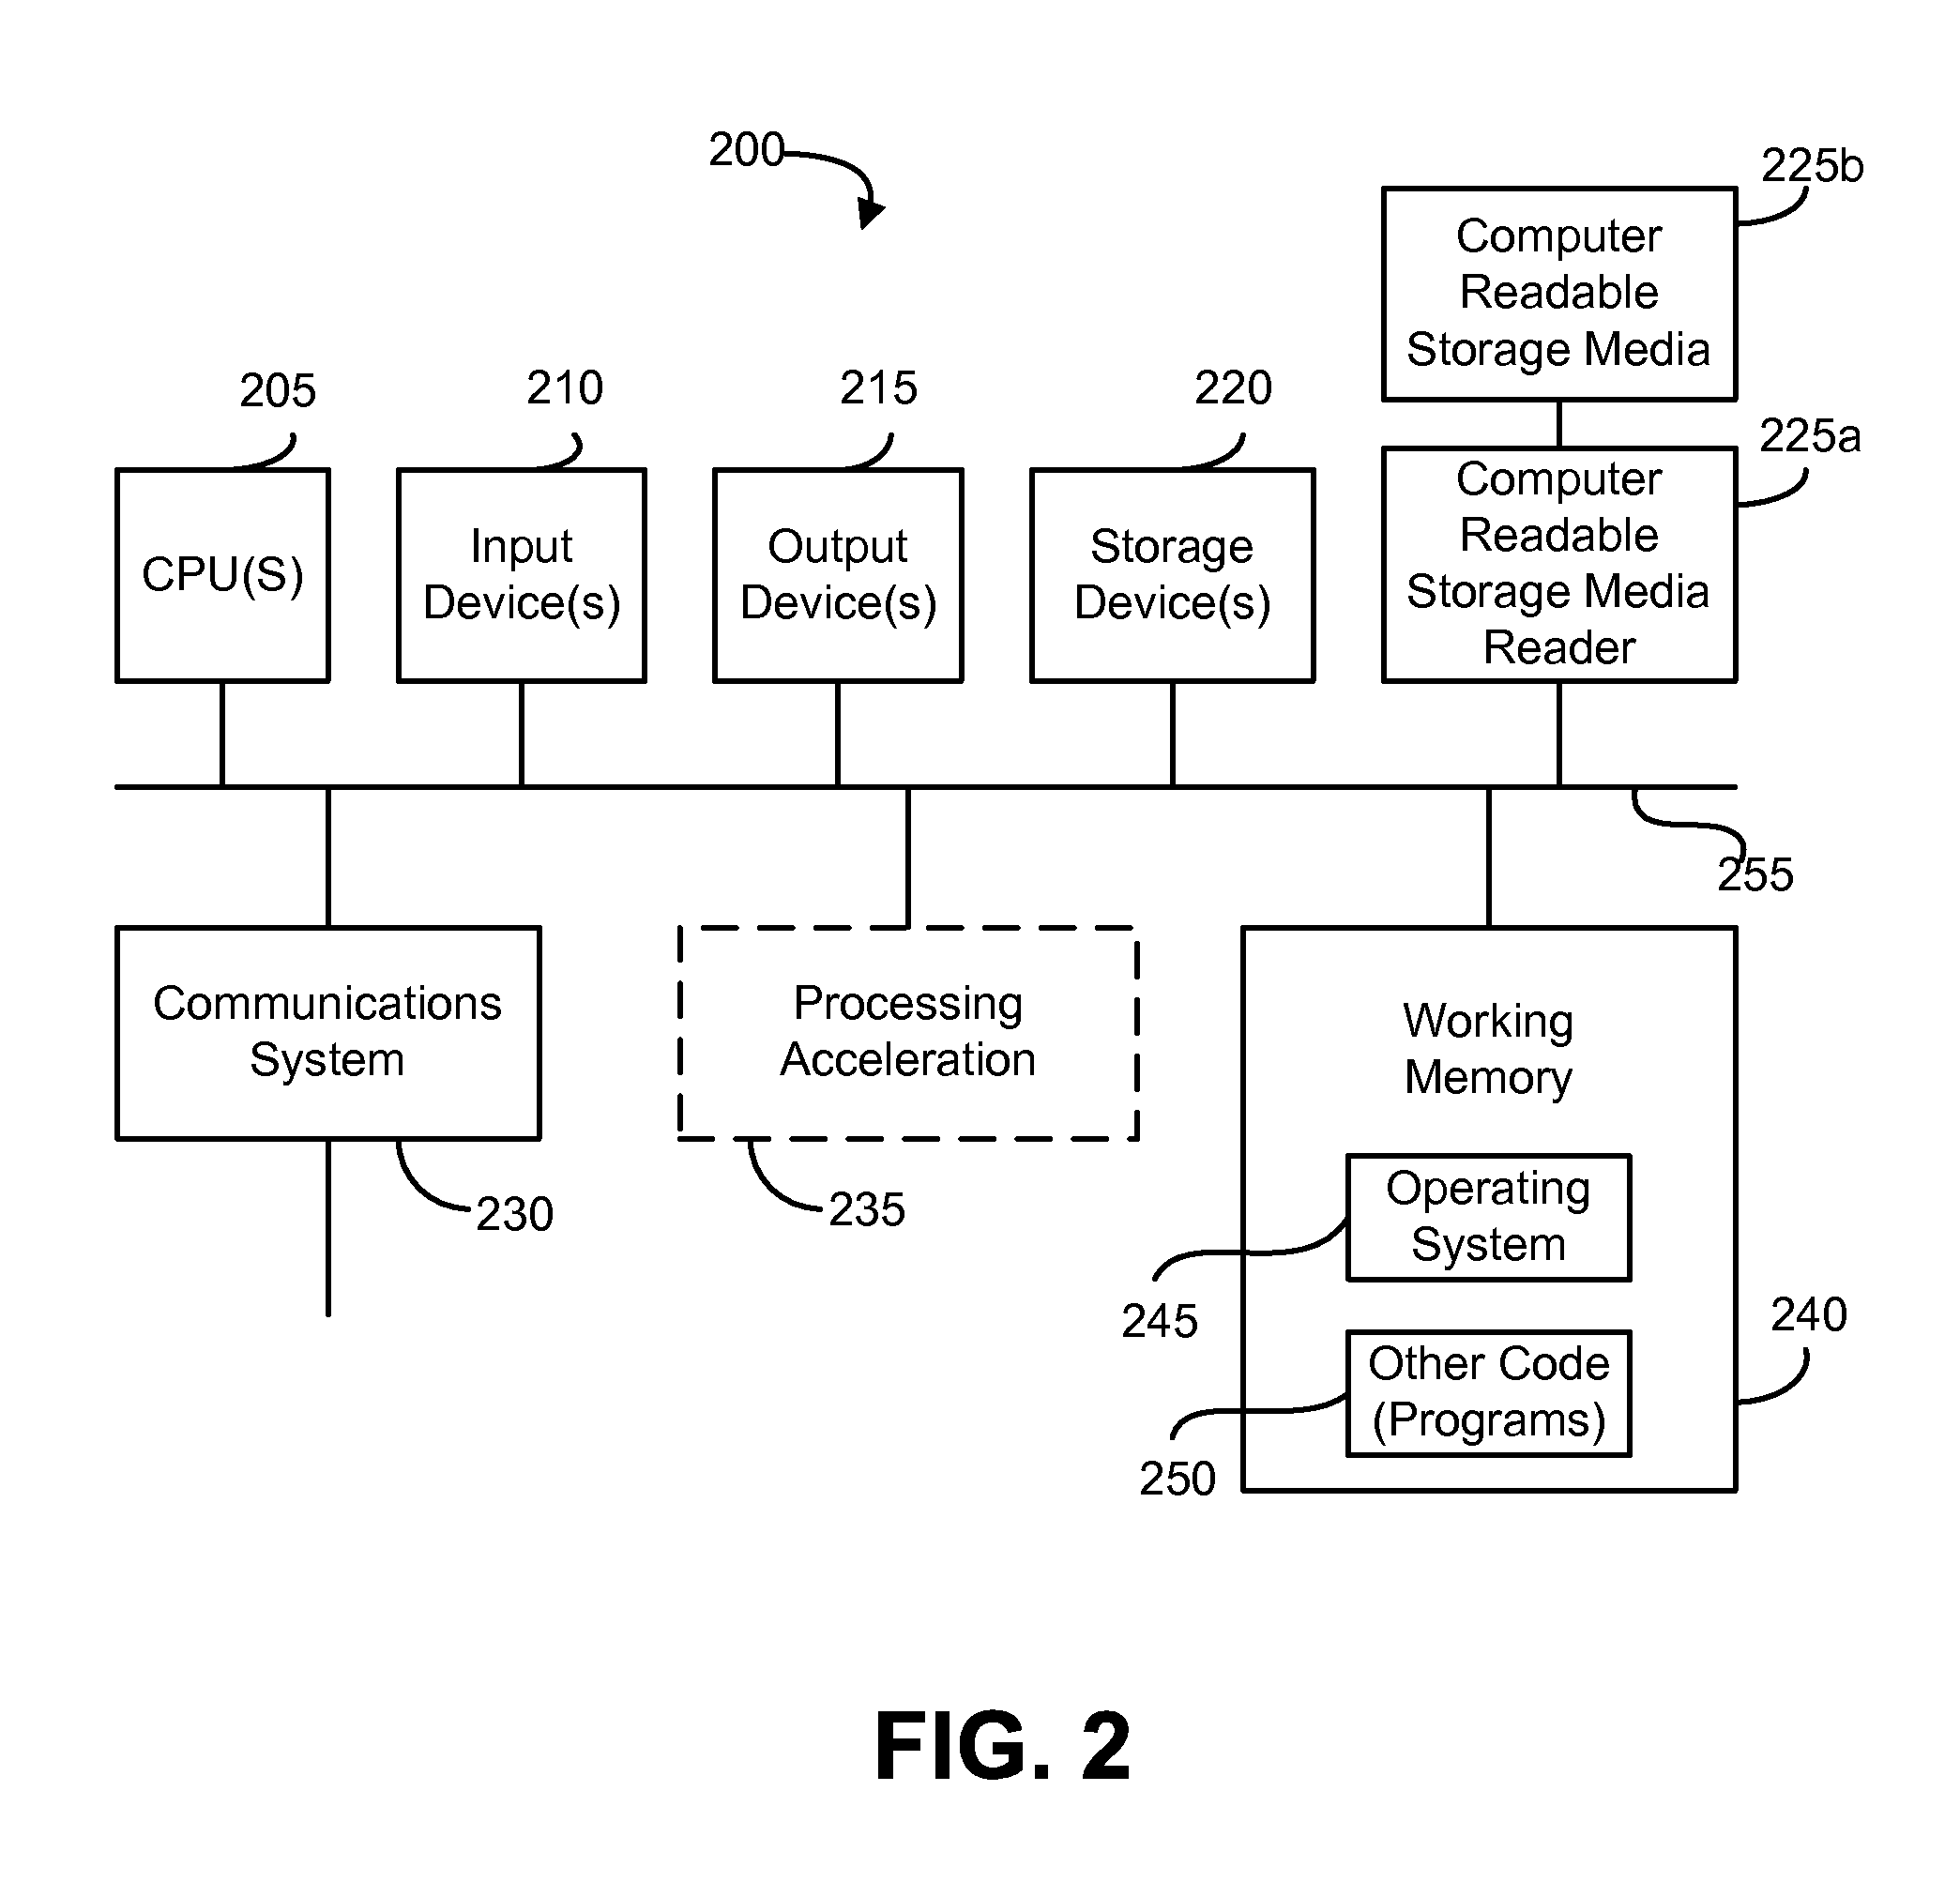 Method for fair share allocation in a multi-echelon service supply chain that considers supercession and repair relationships